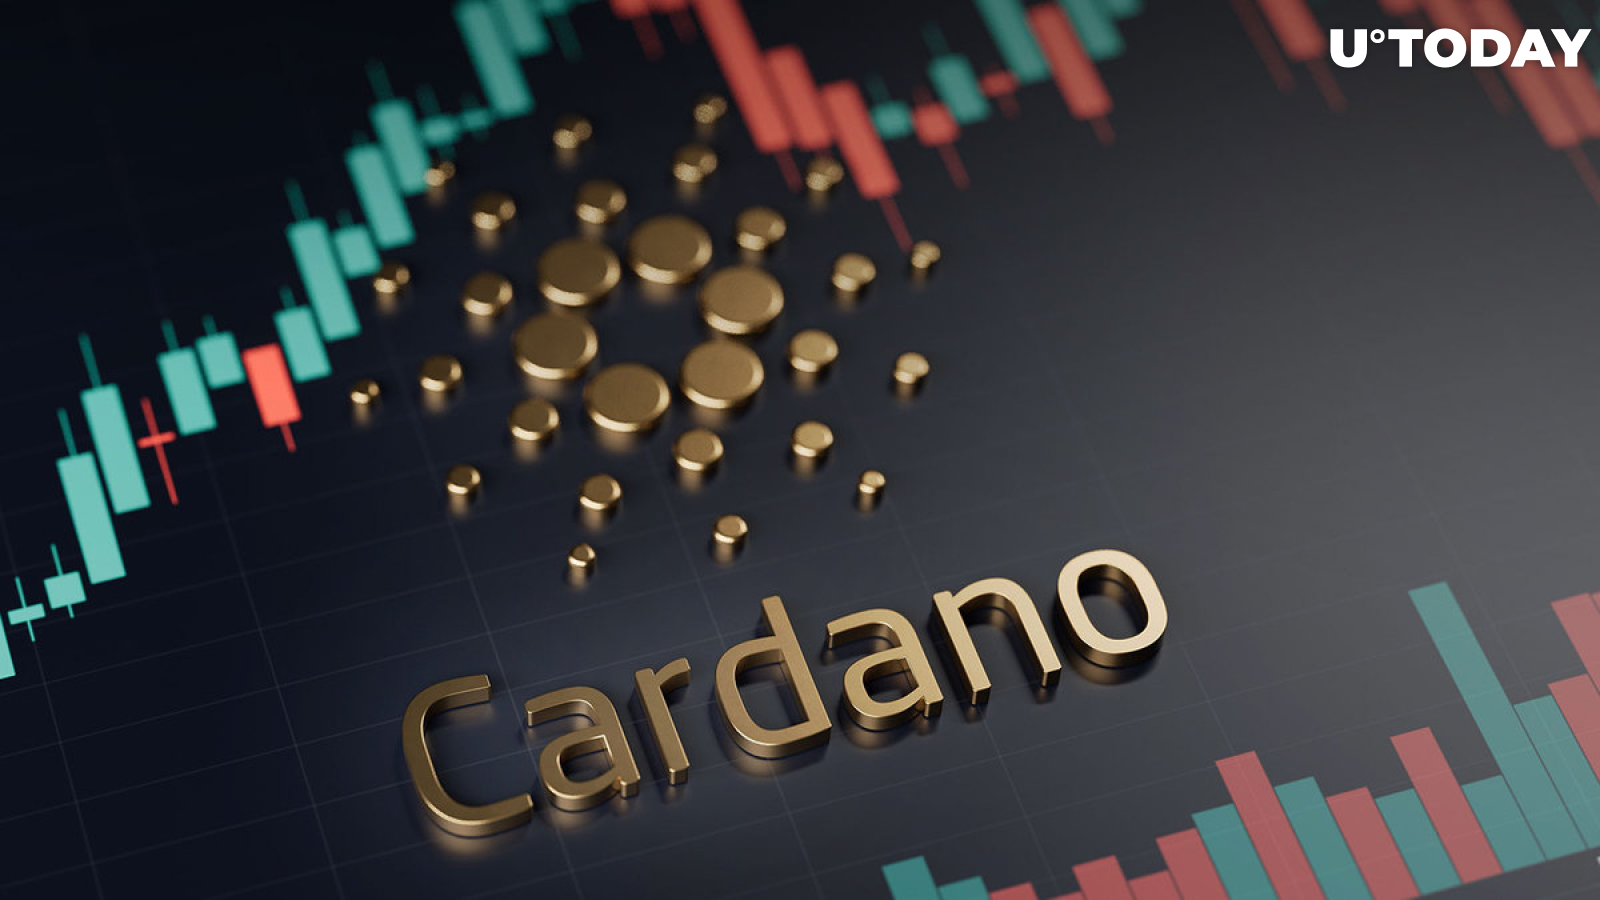 Cardano Network Experiencing Strong Growth in New Wallets, Here's Why It May Be Happening